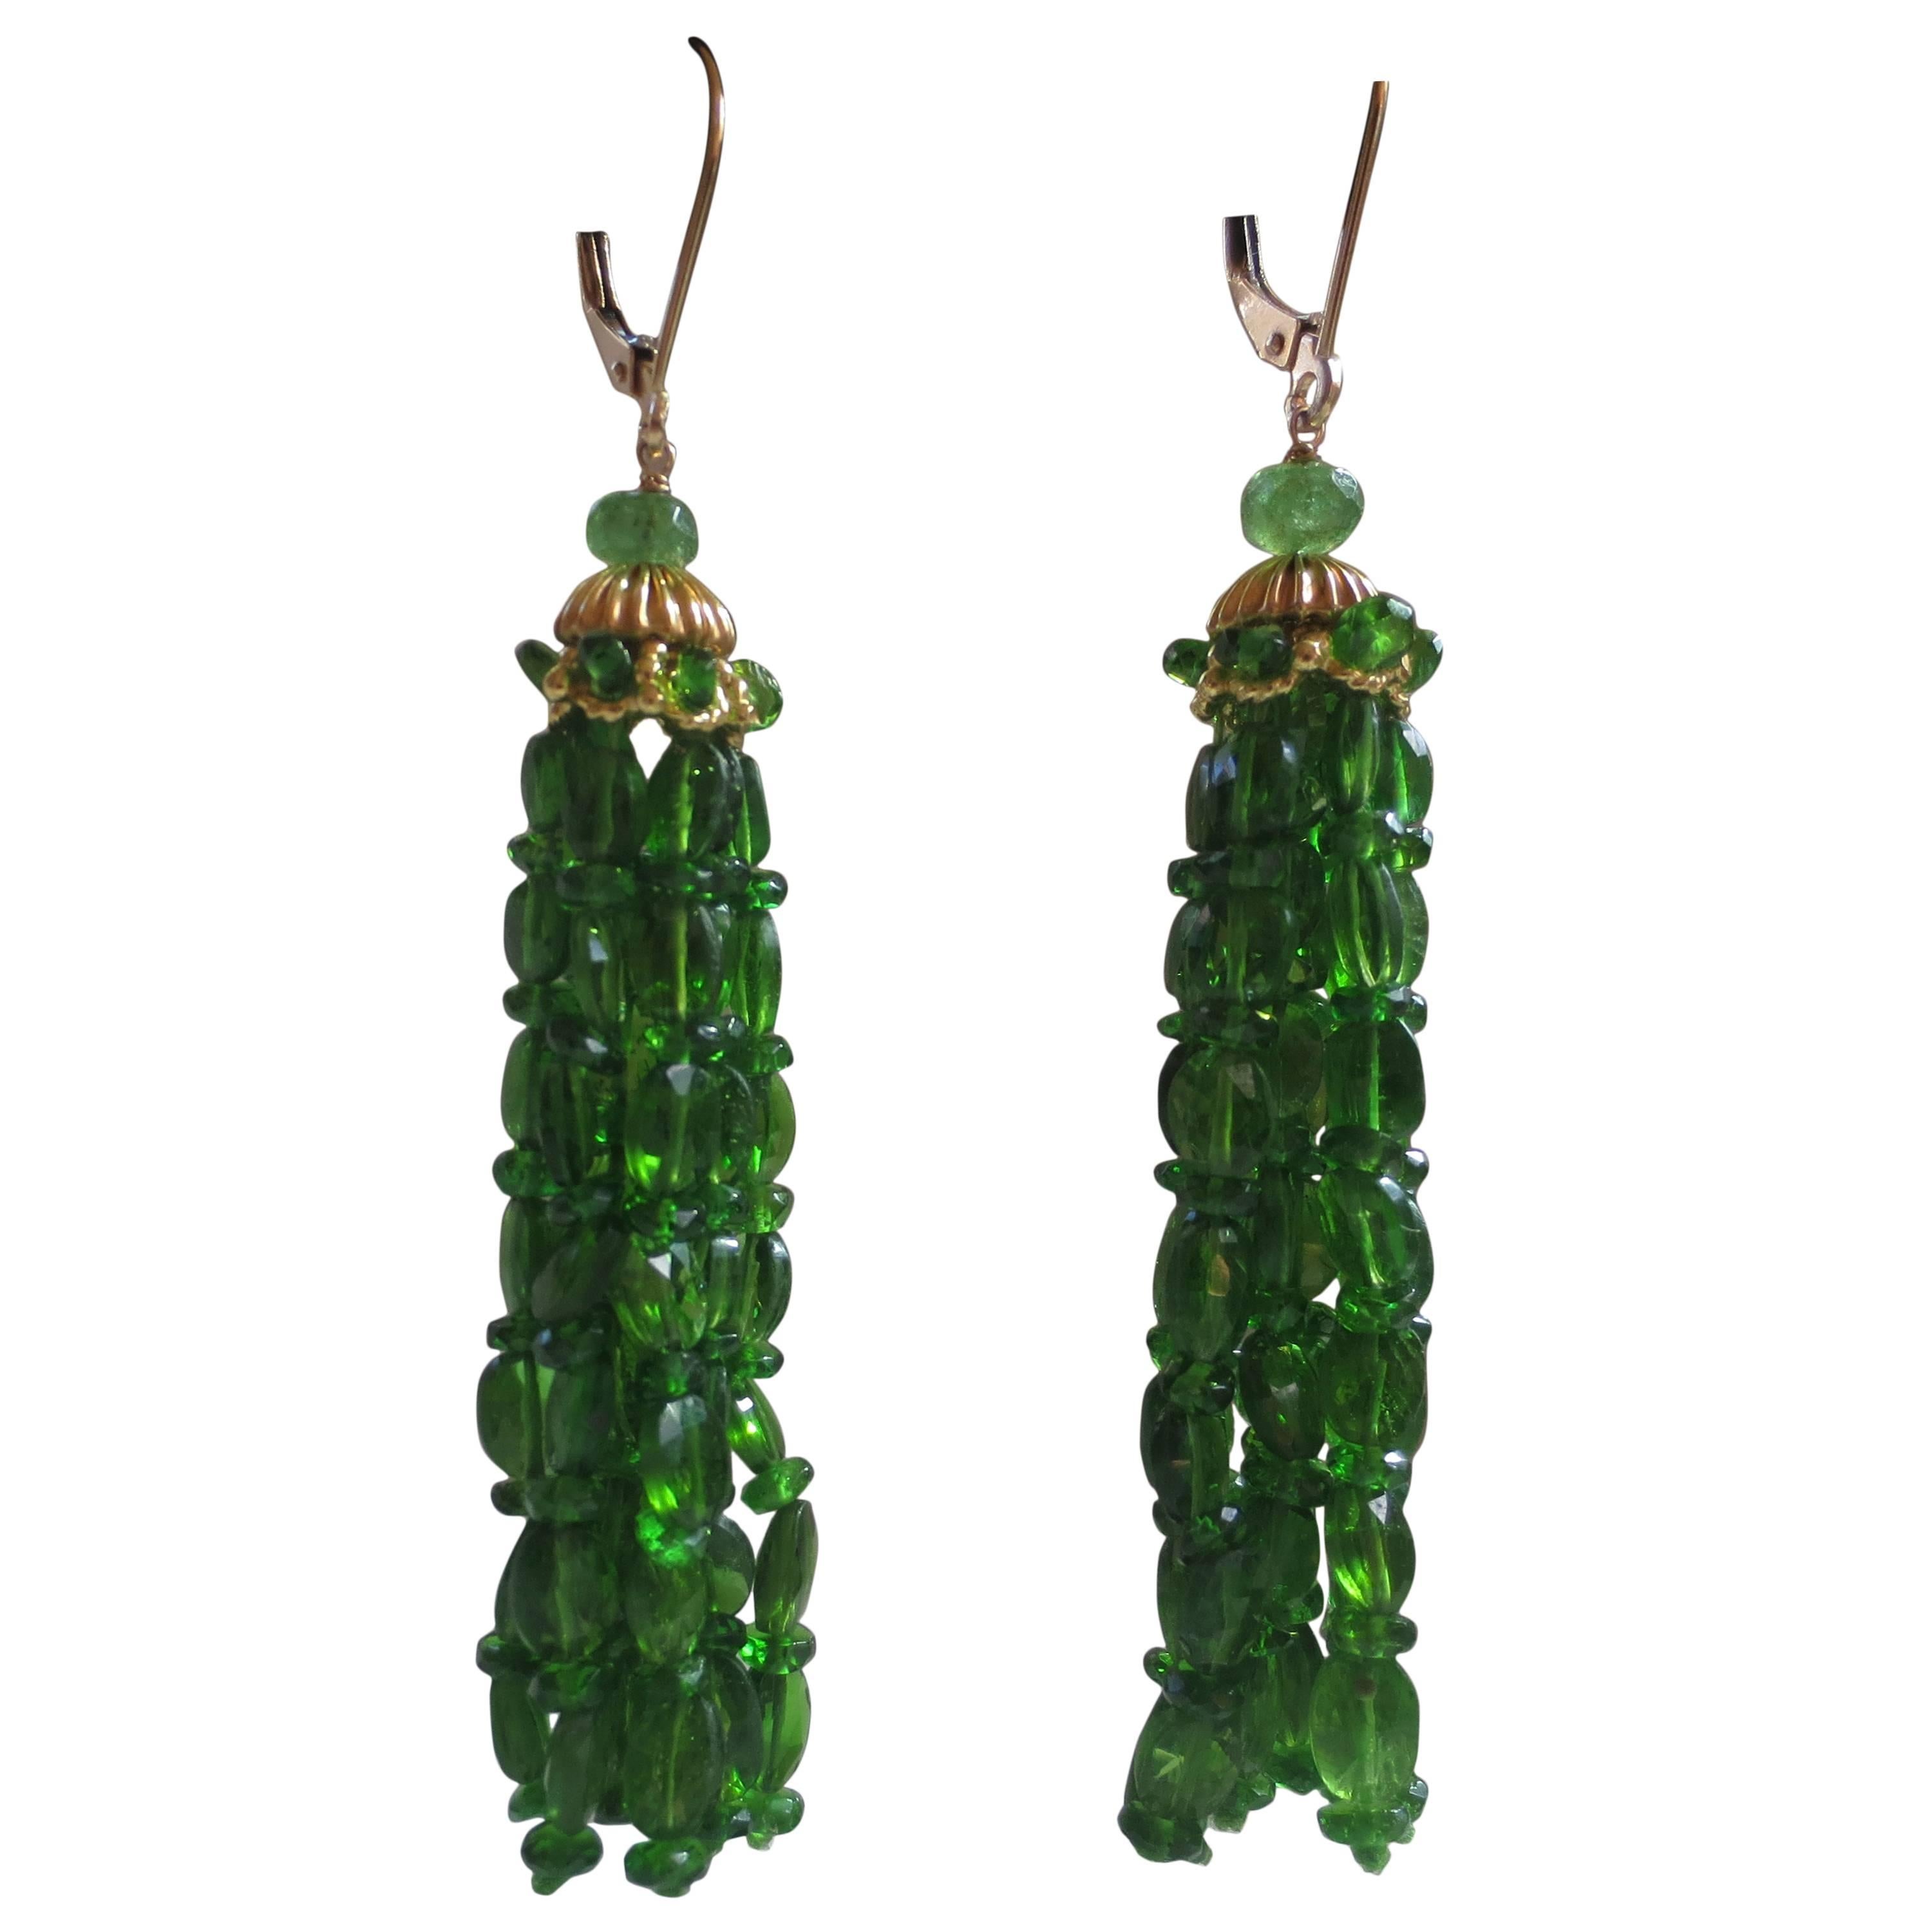 These elegant tassel earrings by Marina J, are topped by a round tsavorite bead and a unique 14 karat gold piece, through which are threaded strands of translucent tsavorite beads. The ear wires are also 14 karat gold.  These 3-inch tassel earrings